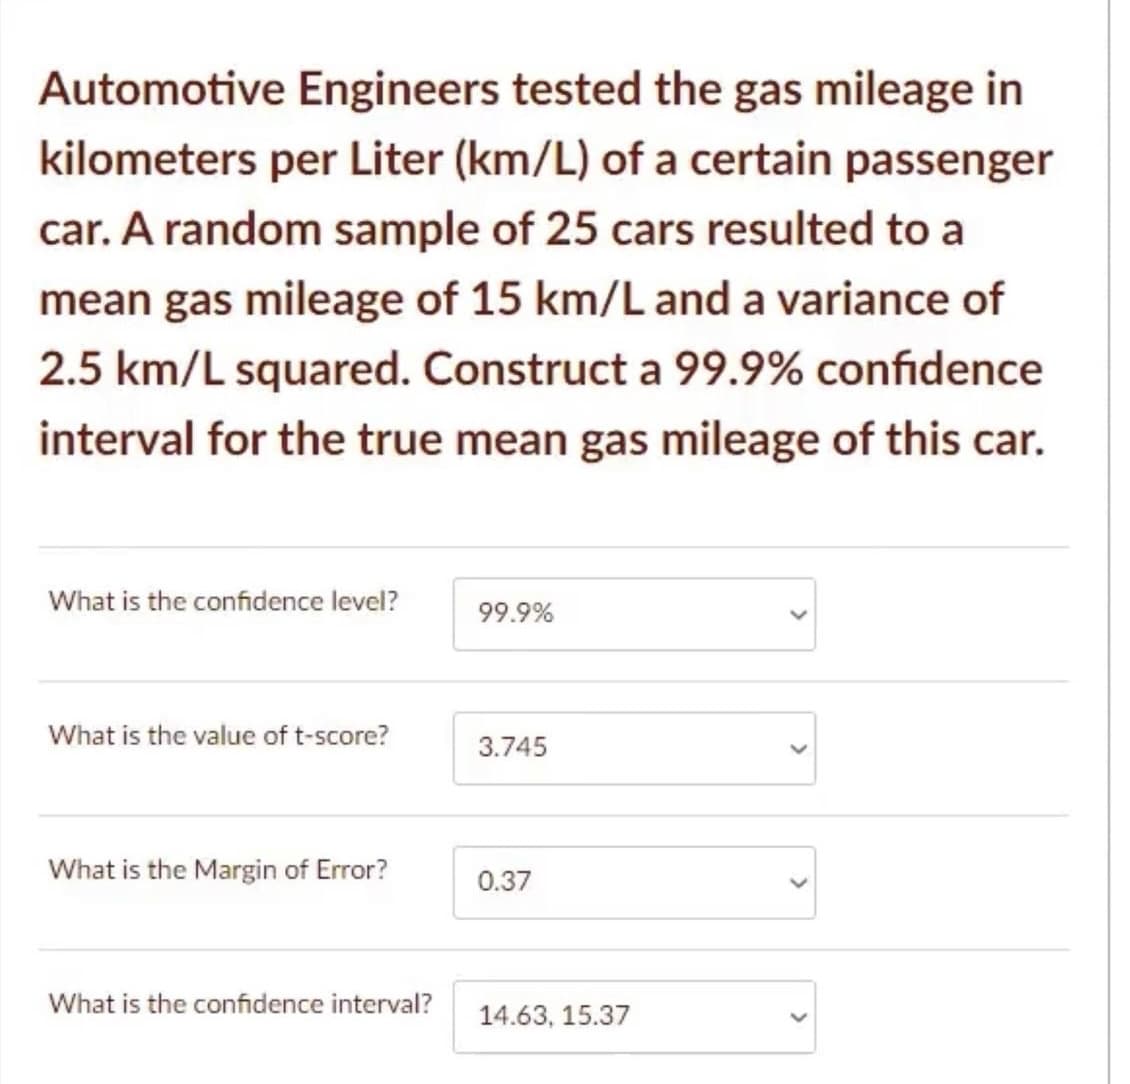 Automotive Engineers tested the gas mileage in
kilometers per Liter (km/L) of a certain passenger
car. A random sample of 25 cars resulted to a
mean gas mileage of 15 km/L and a variance of
2.5 km/L squared. Construct a 99.9% confidence
interval for the true mean gas mileage of this car.
What is the confidence level?
99.9%
What is the value of t-score?
3.745
What is the Margin of Error?
0.37
What is the confidence interval?
14.63, 15.37